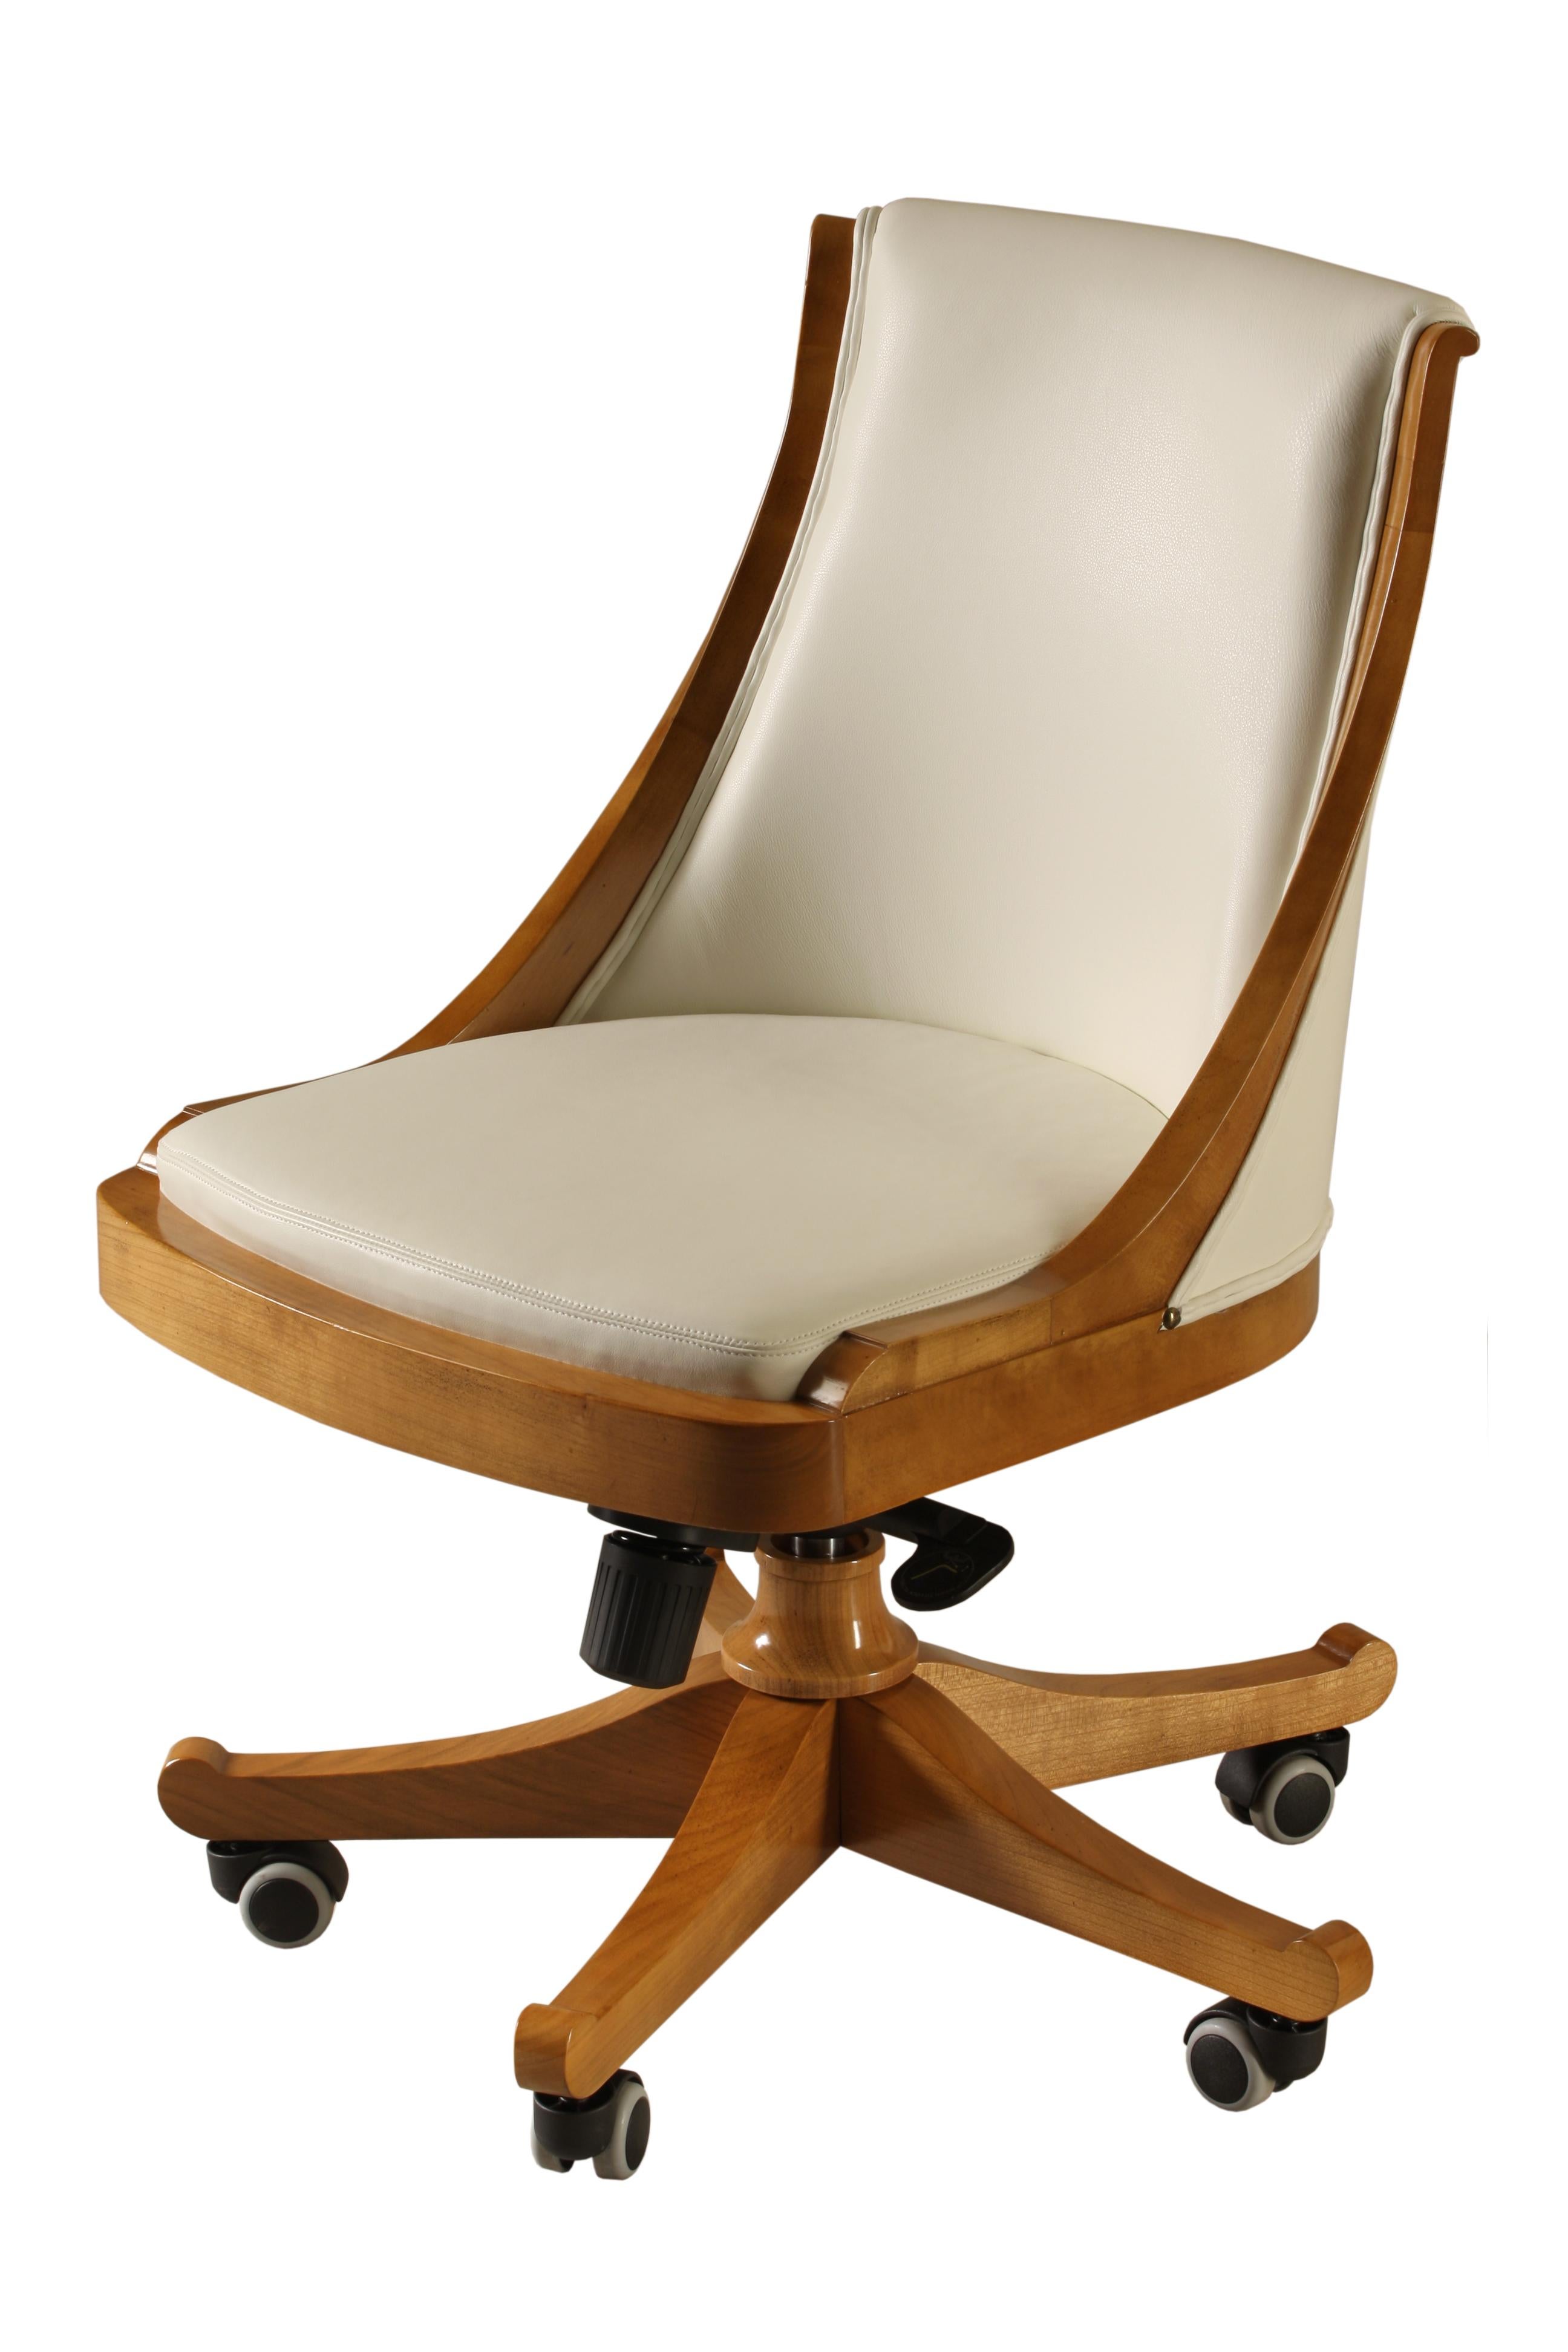 Contemporary Swivel Chair on Wheels Made in Cherrywood